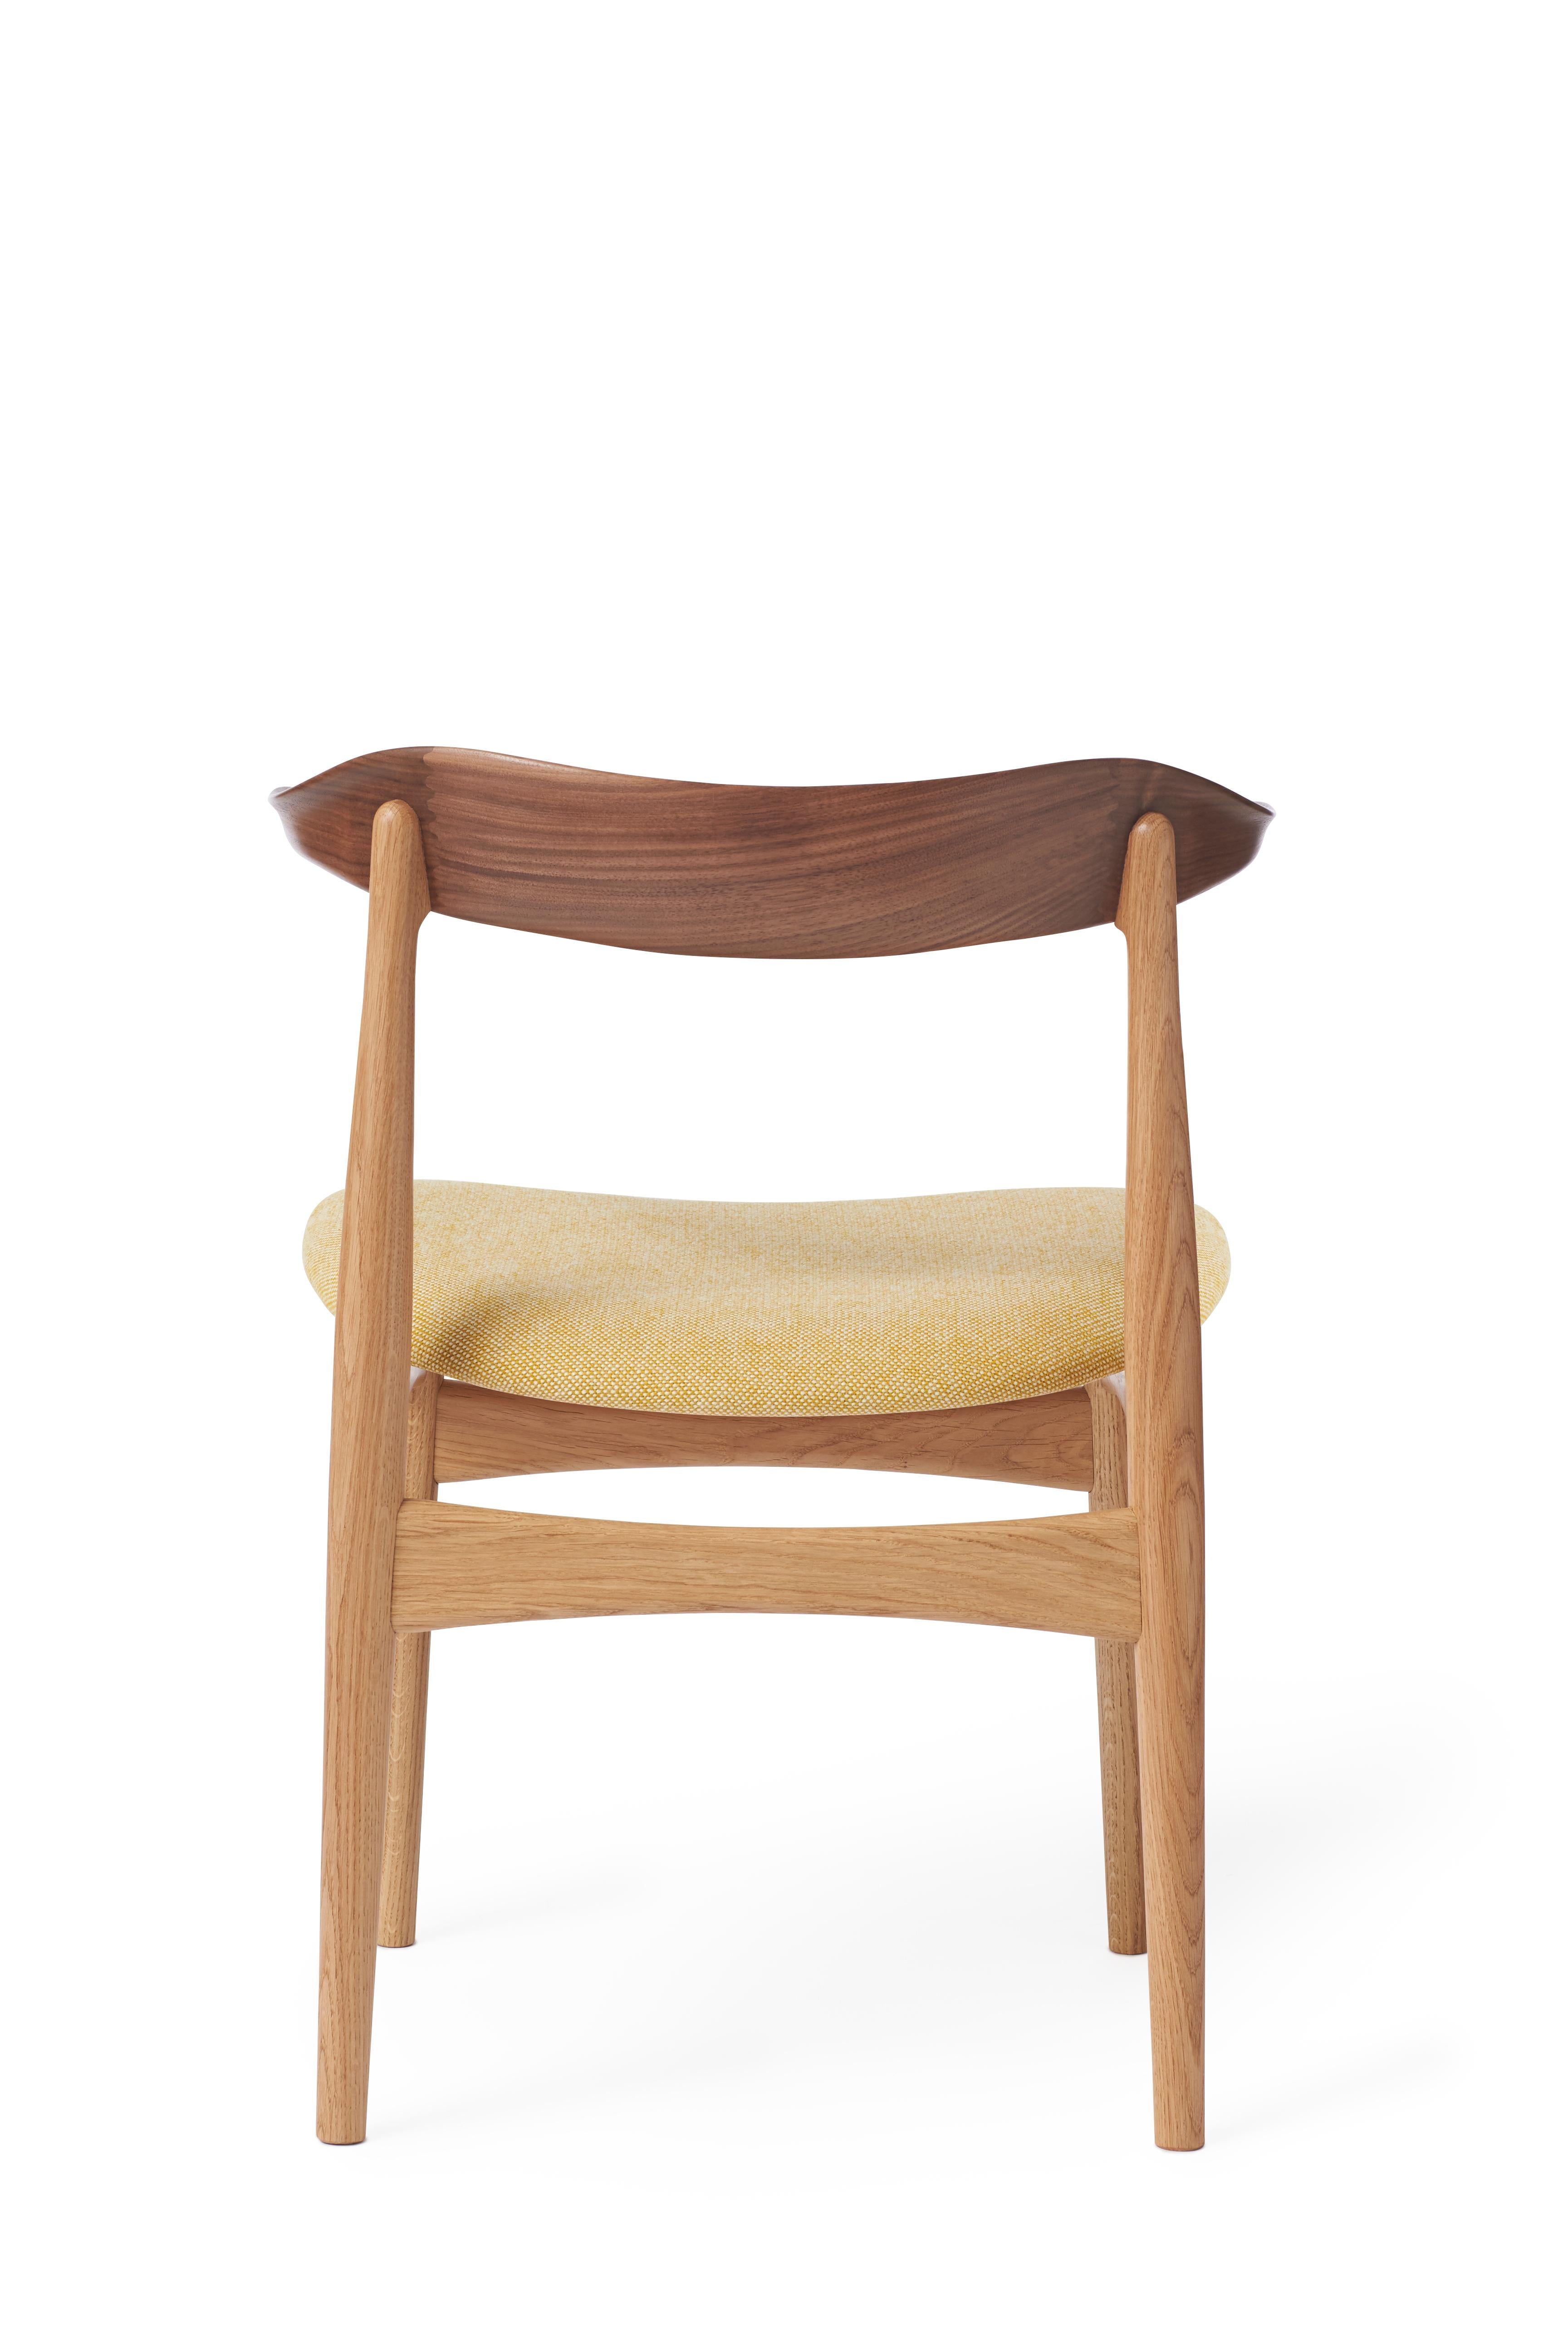 For Sale: Yellow (Halling 407) Cow Horn Mixed Wood Chair, by Knud Færch from Warm Nordic 3